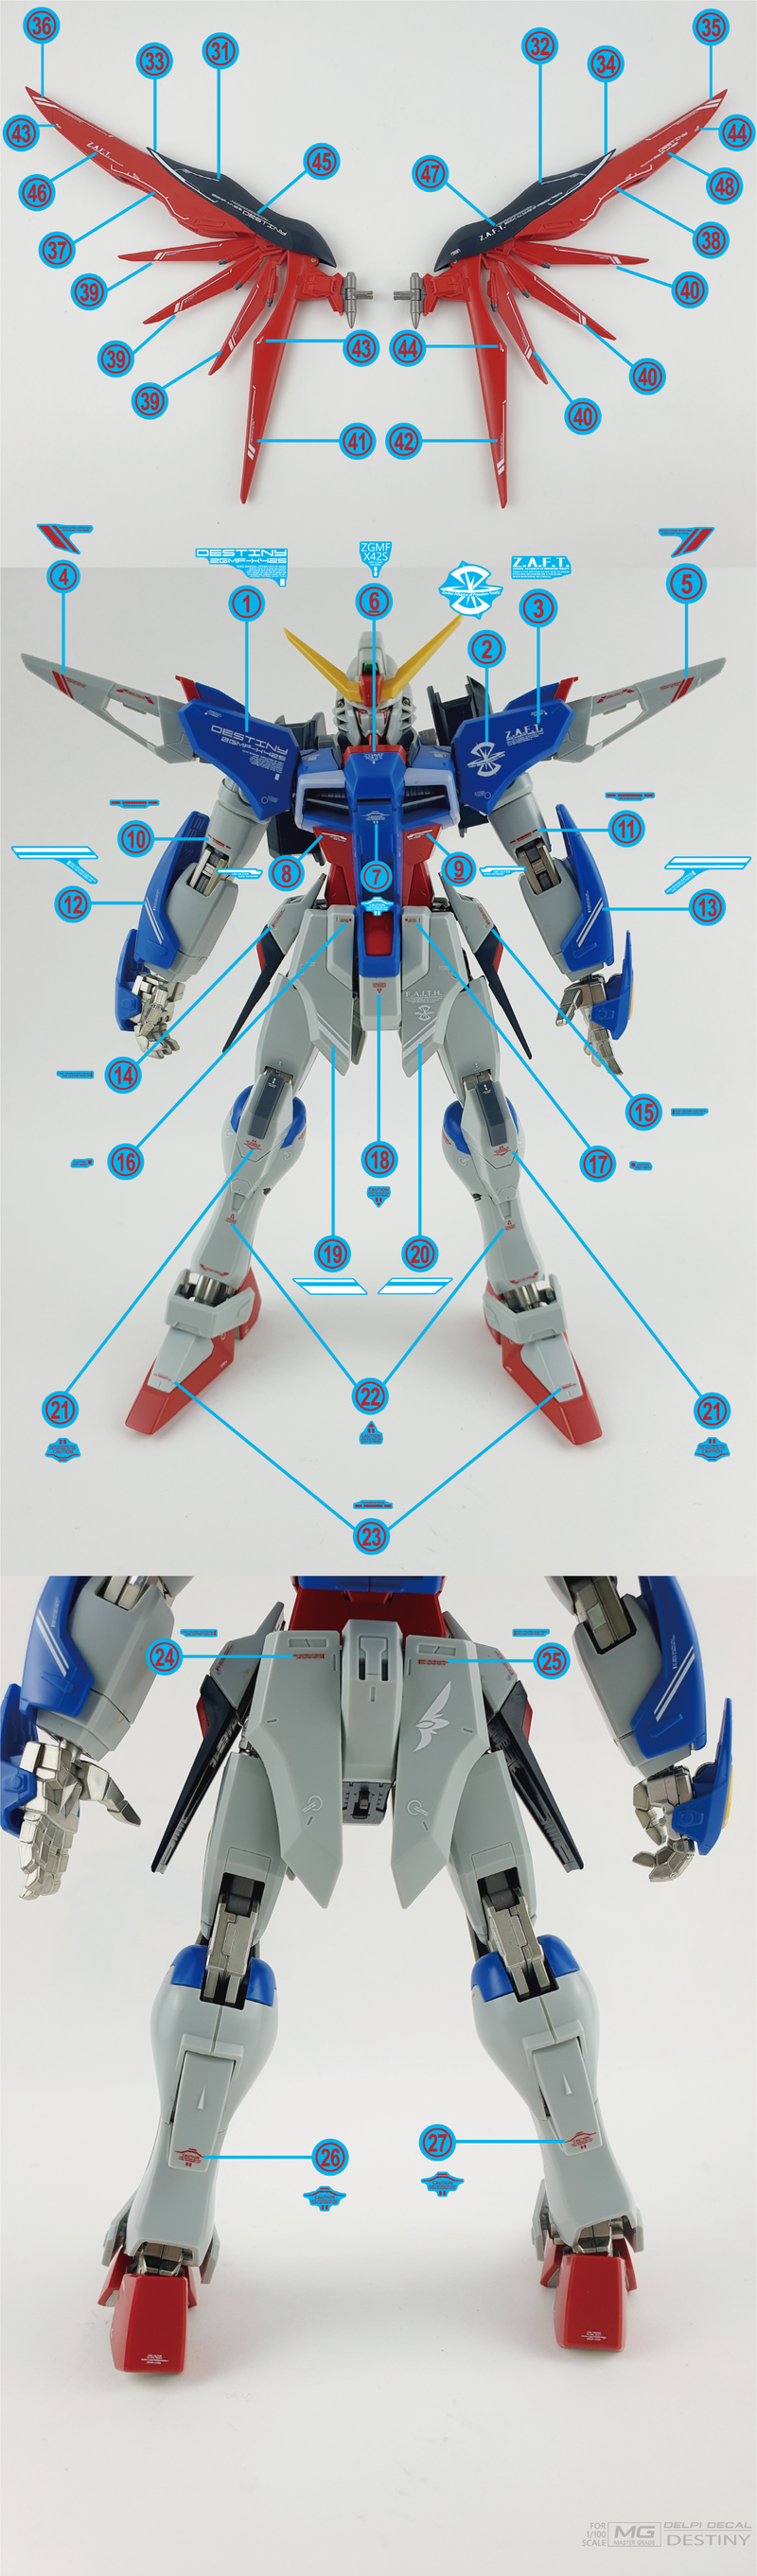 Delpi Decal - MG Destiny Water Decal